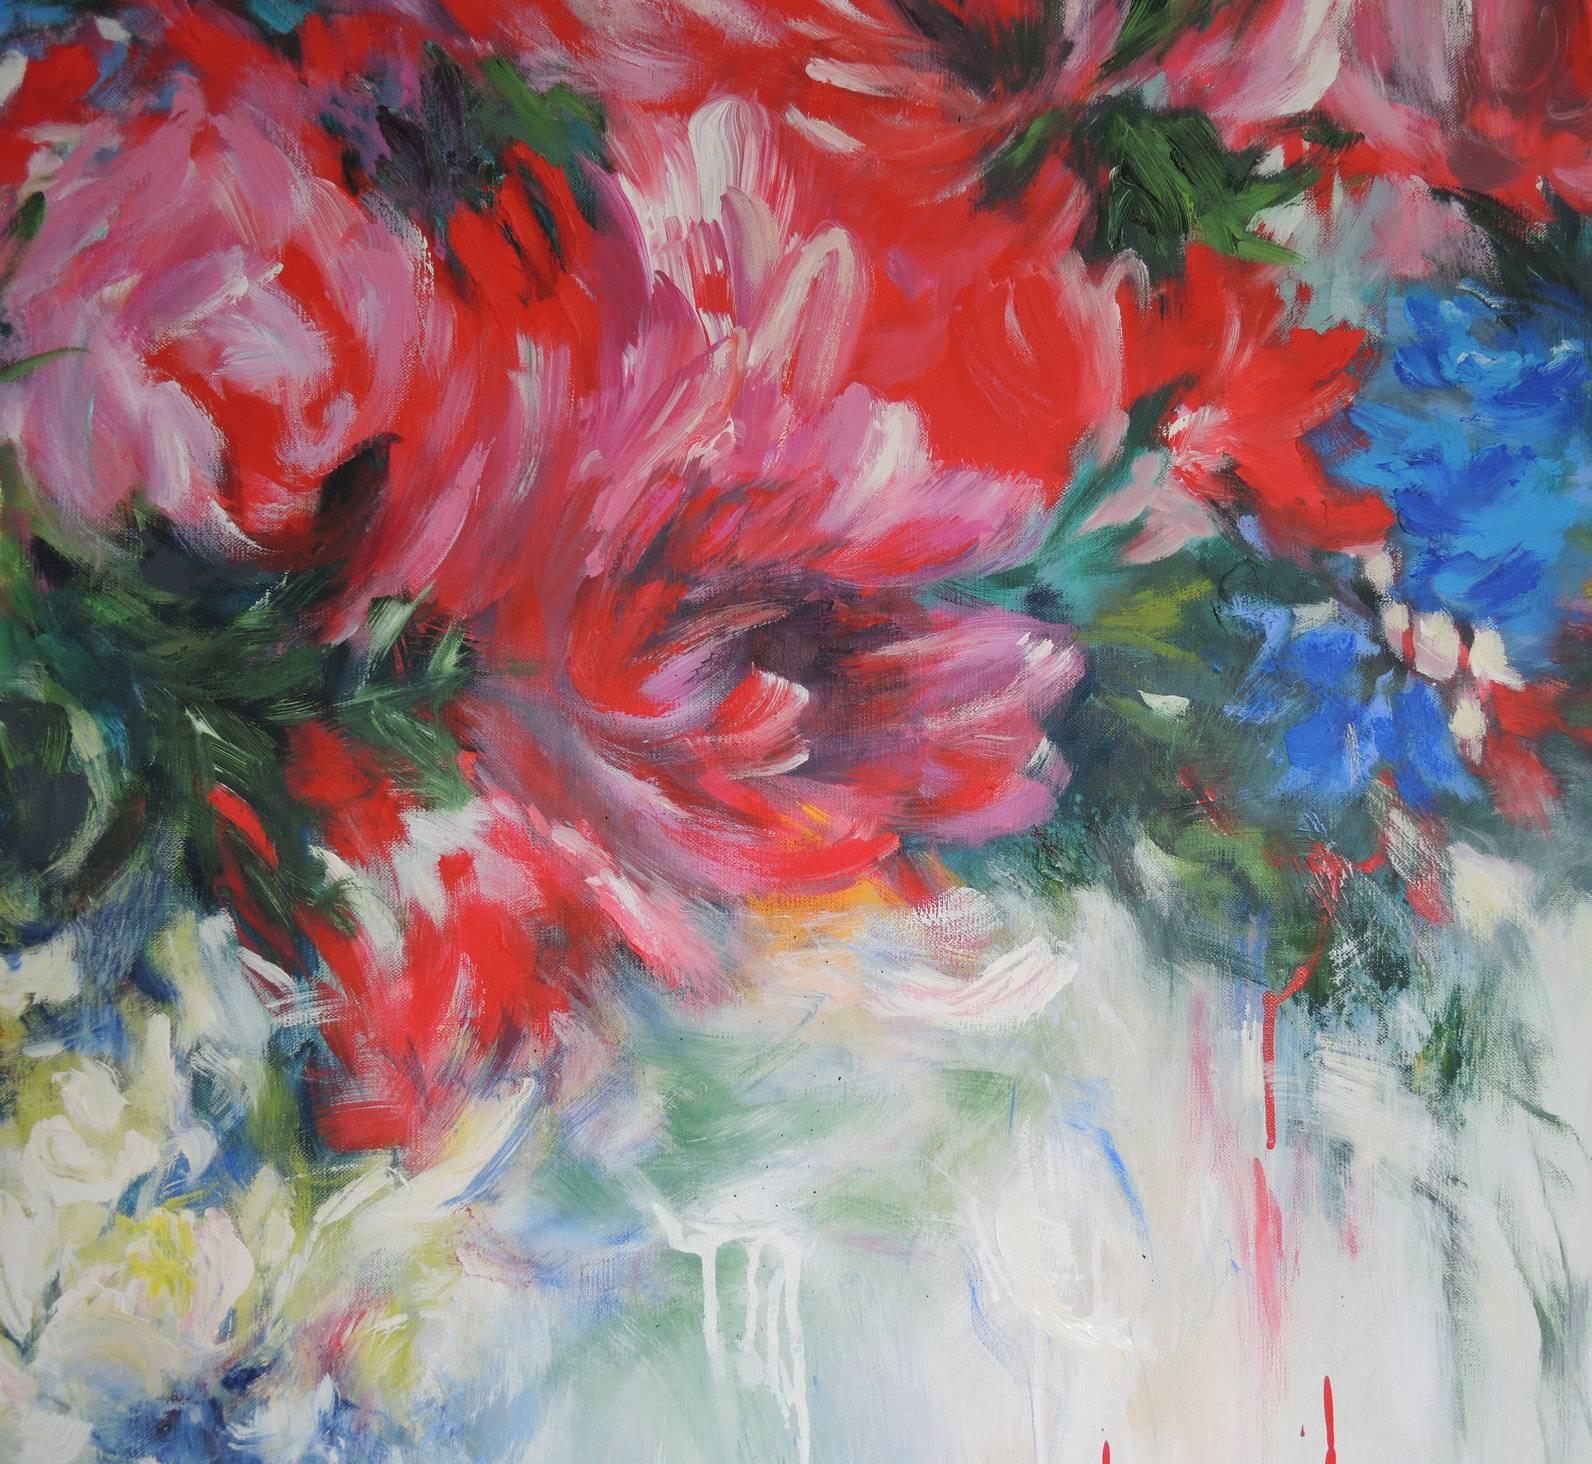 Mary Chaplin
The Aria of Summer
Original Still Life Painting
Acrylic on Canvas
Canvas Size: H 100cm x W 100cm x D 2cm
Sold Unframed
Please note that insitu images are purely an indication of how a piece may look.

The Aria of Summer is an original